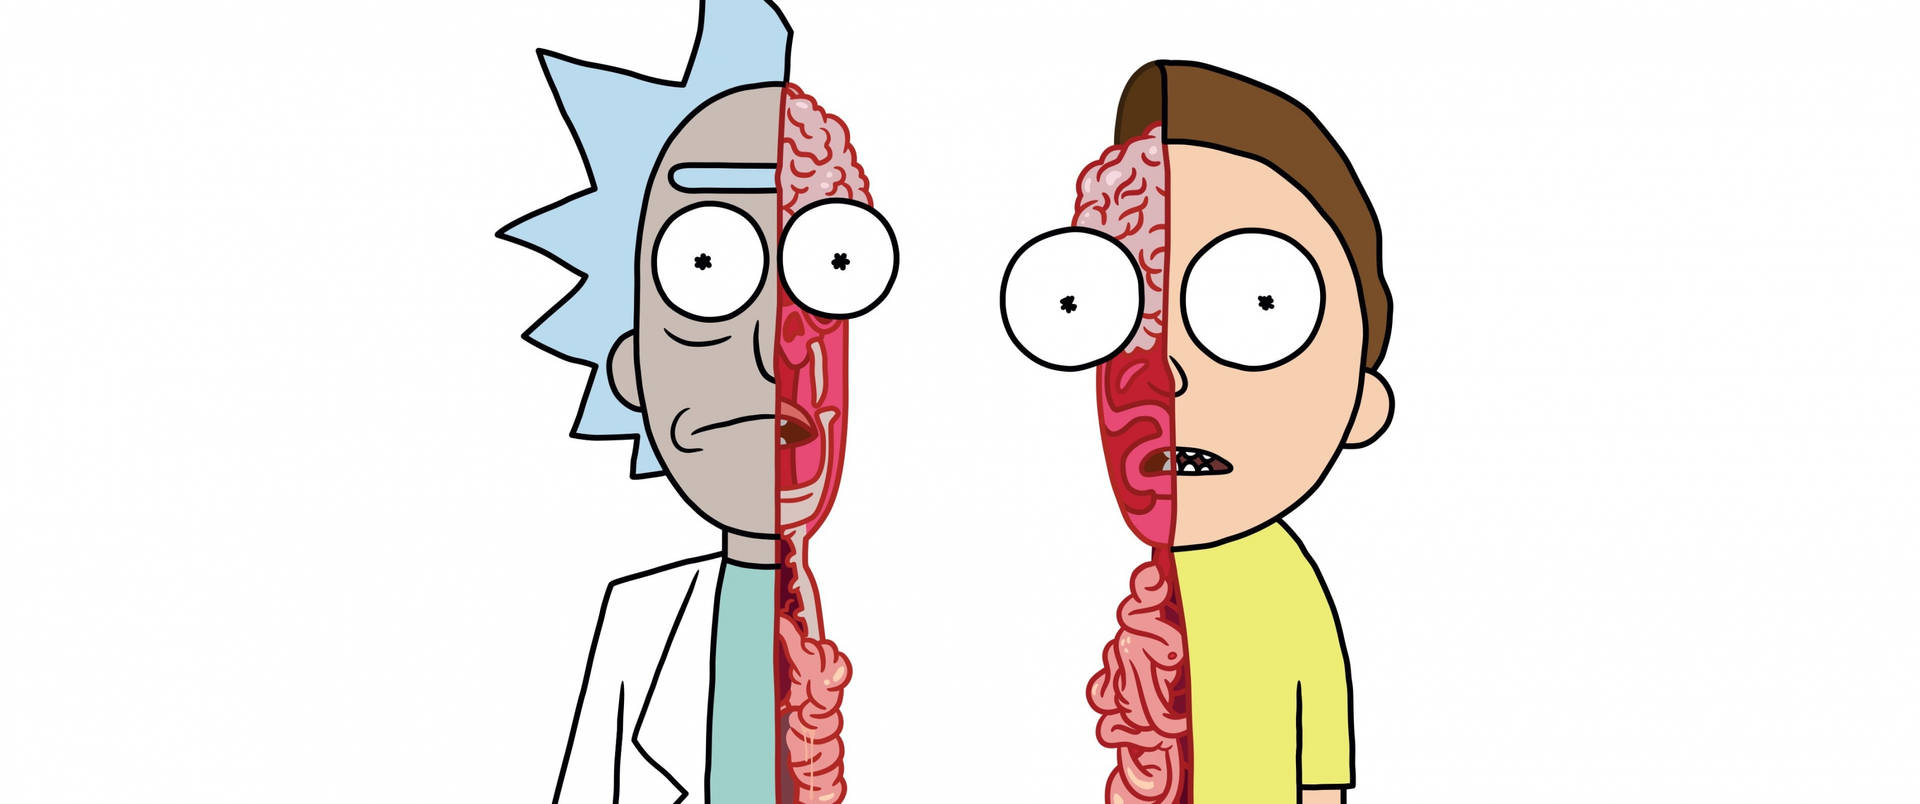 Rick And Morty Are Shown With Their Heads Cut Off Wallpaper